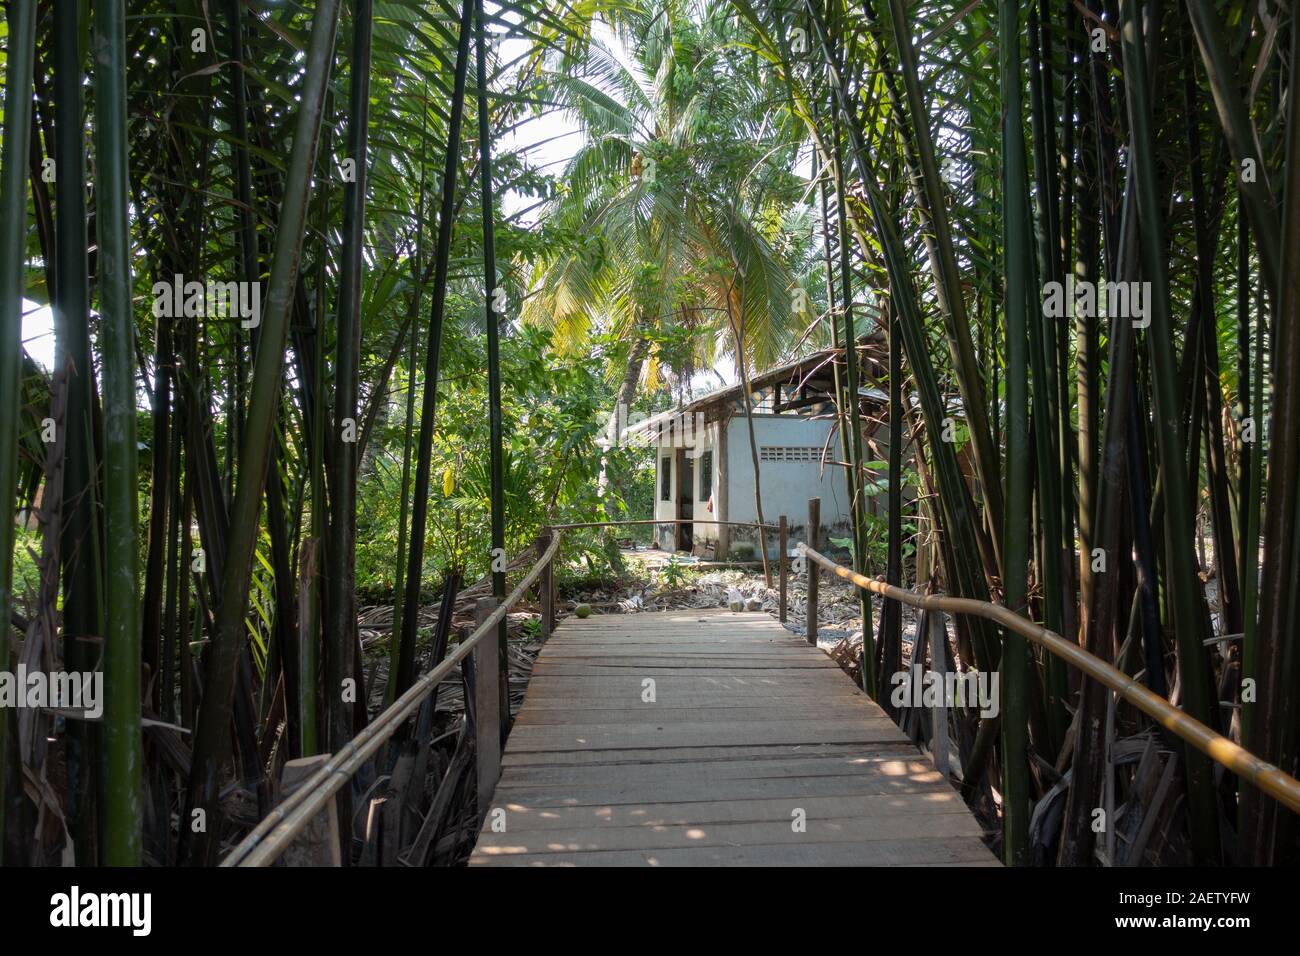 A small building at the end of a path through a bamboo forest in southern Vietnam near the Mekong Delta and Saigon, Vietnam Stock Photo